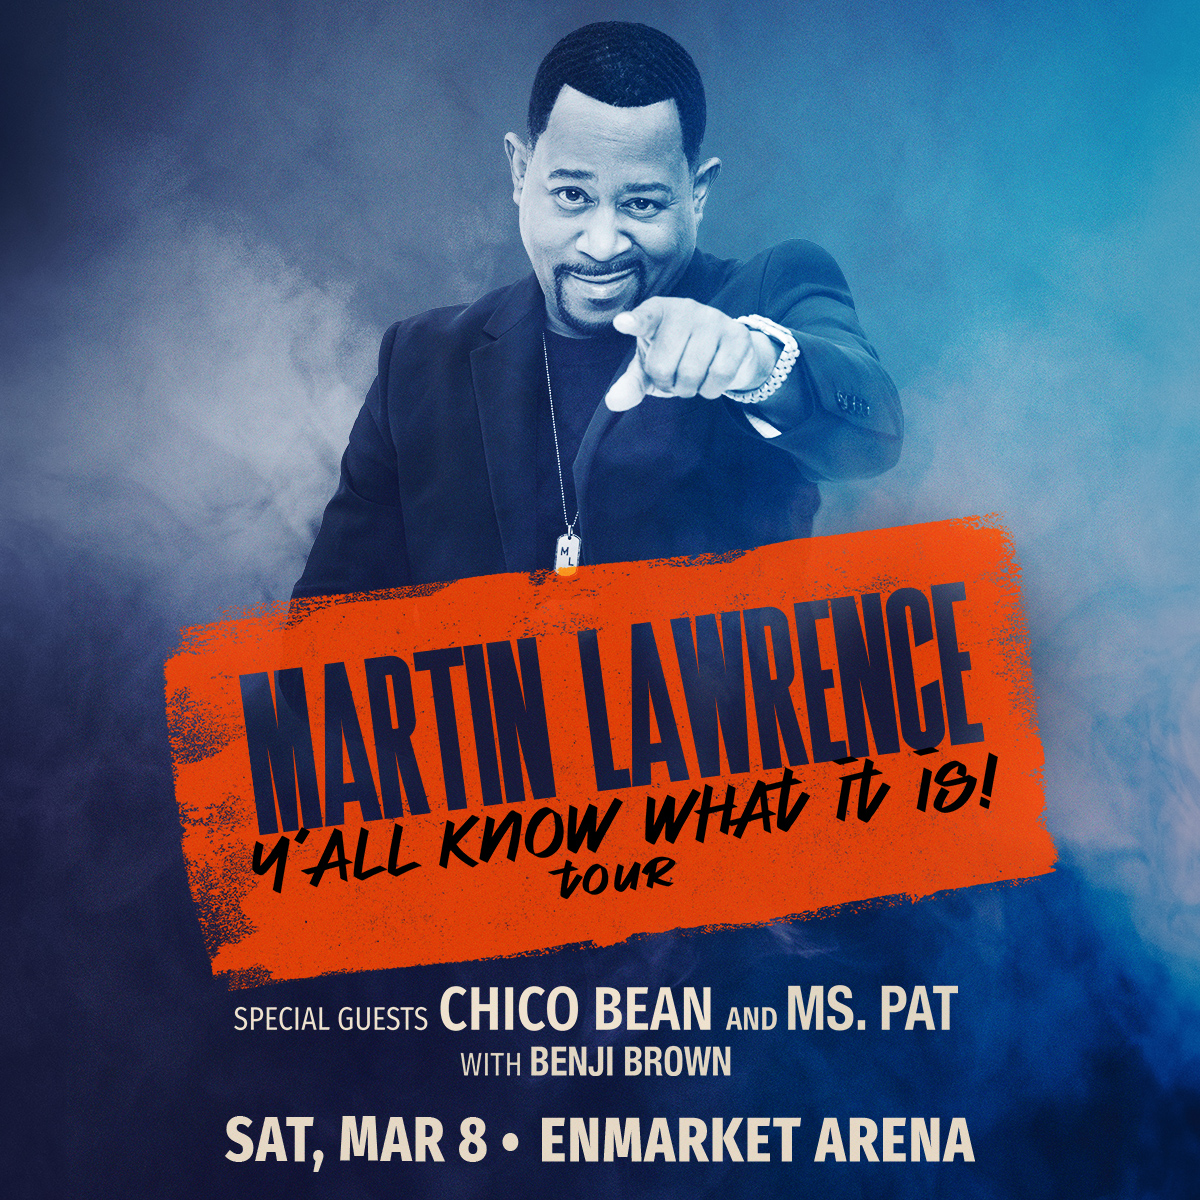 Martin Lawrence Contest Rules